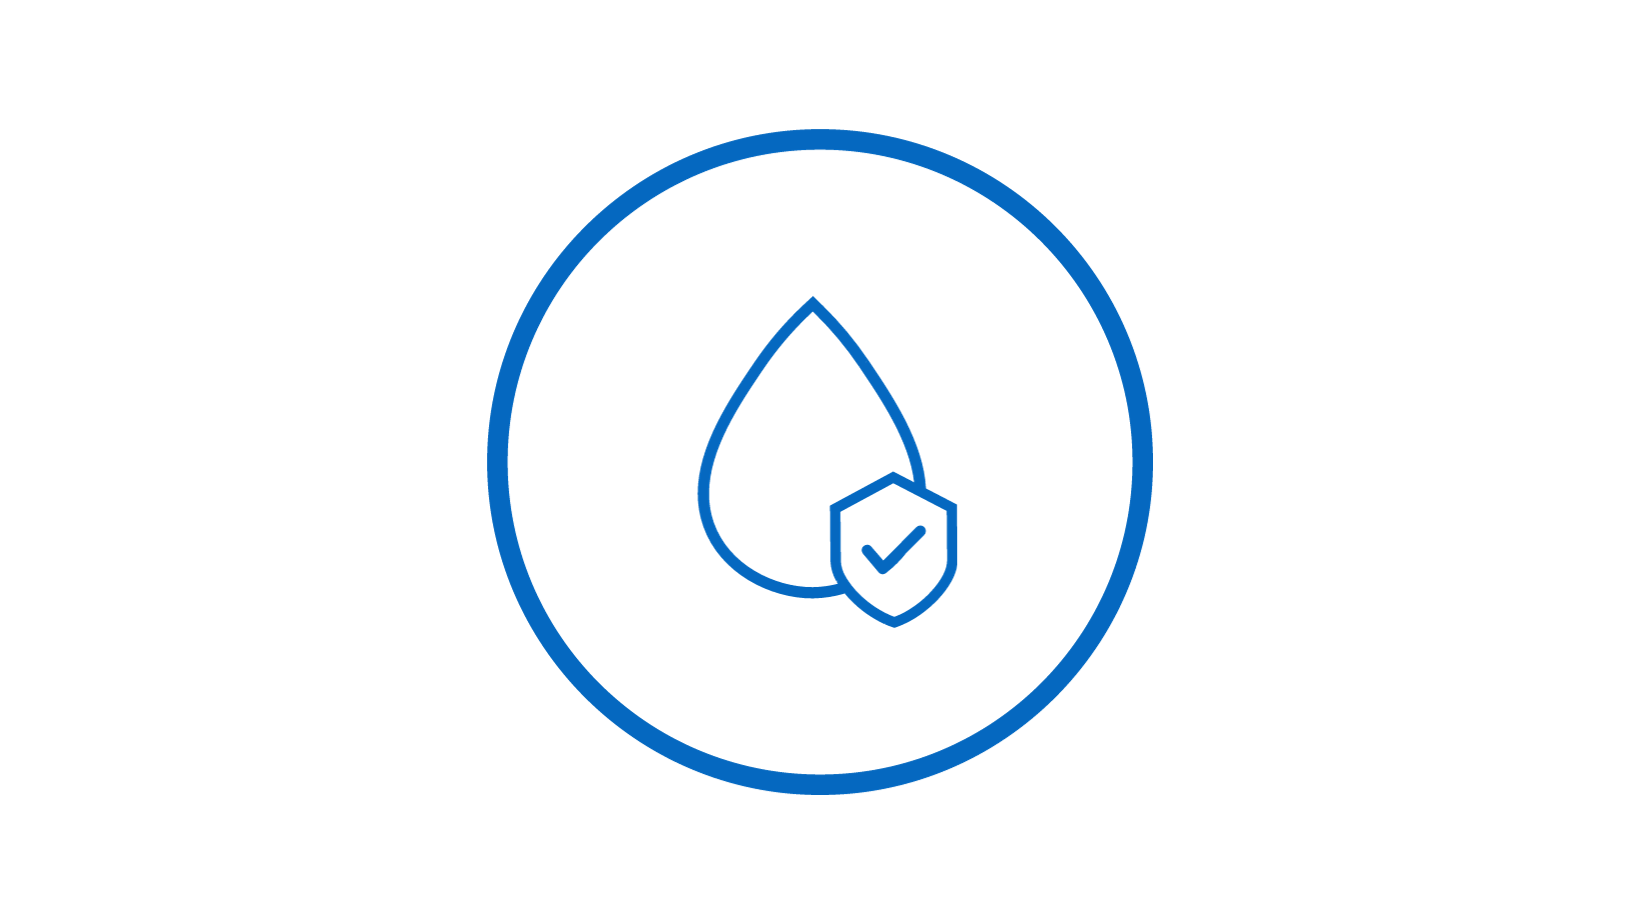 Icon of a shield over a drop of water